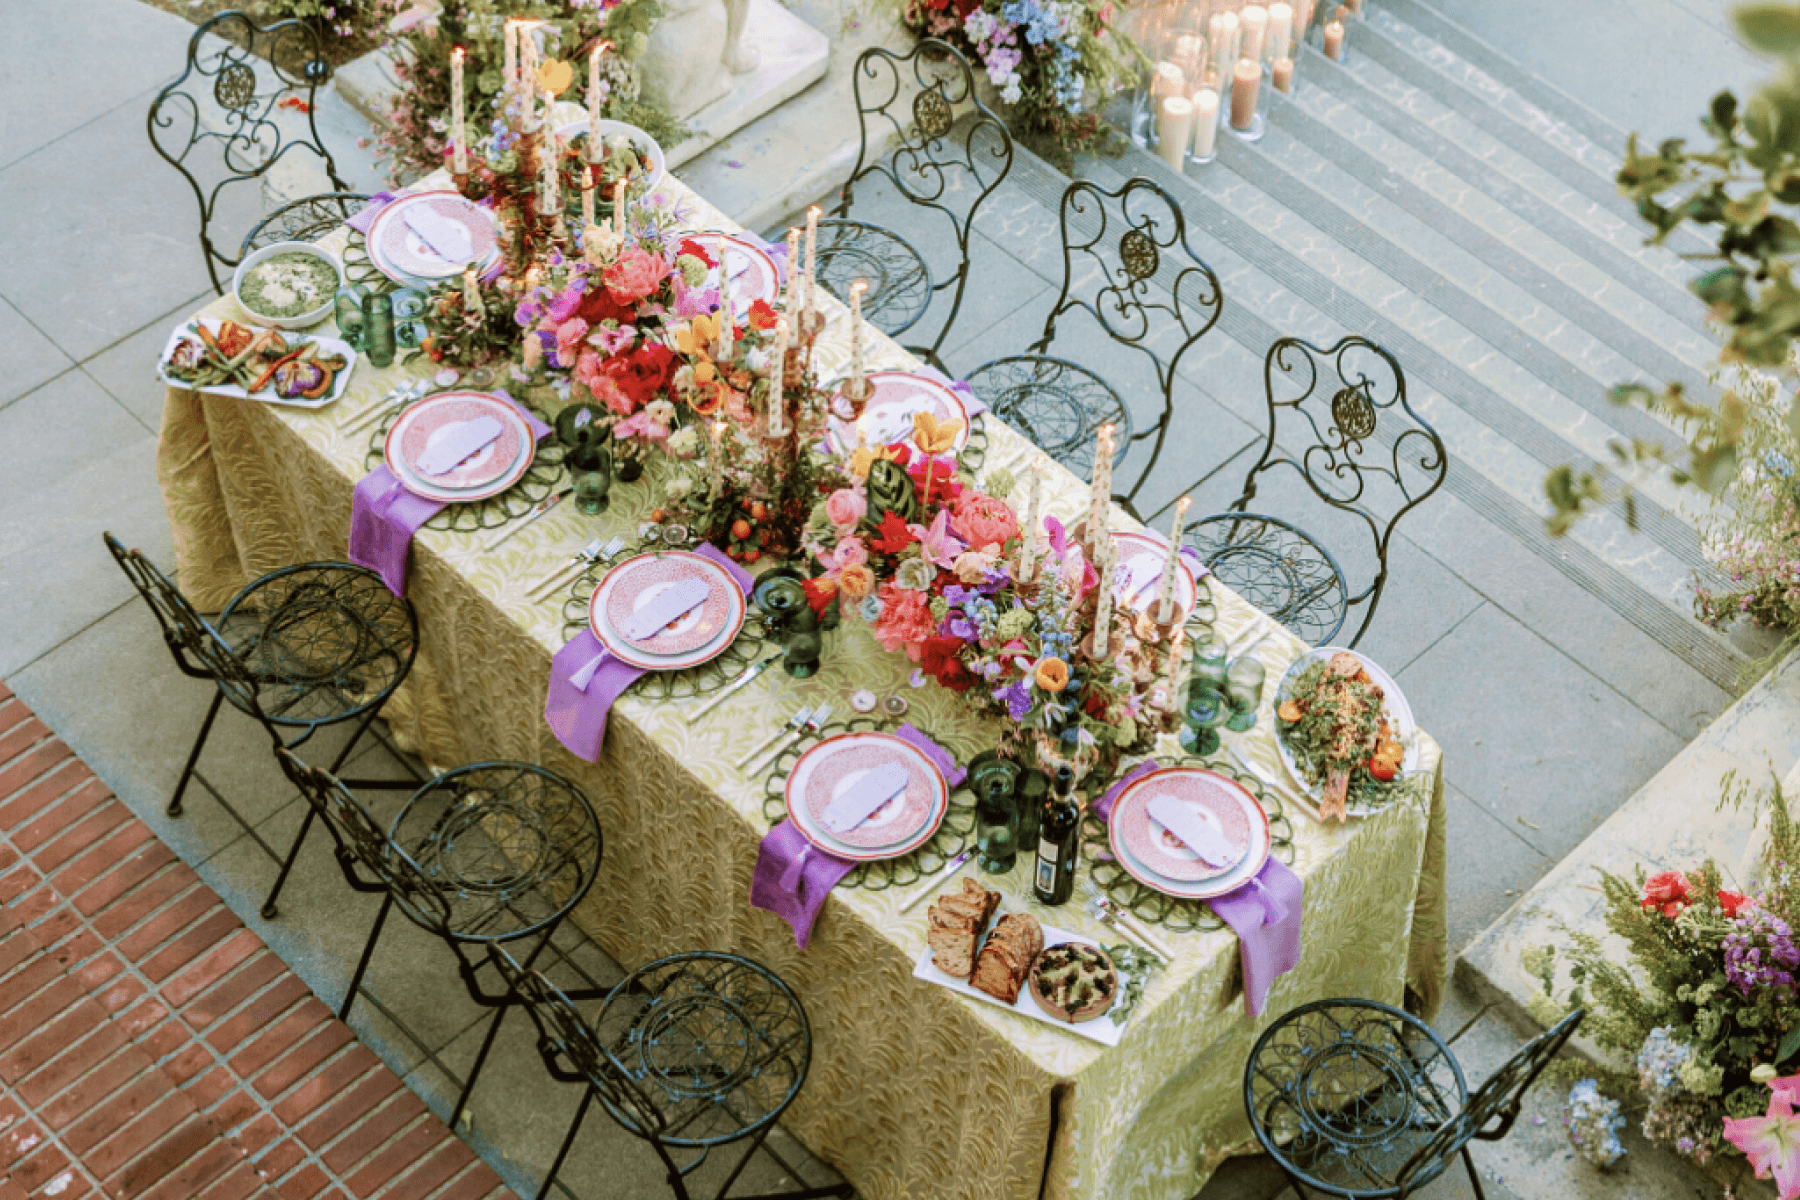 An outdoor banquet table with flowers, candles, and purple linens shown from above